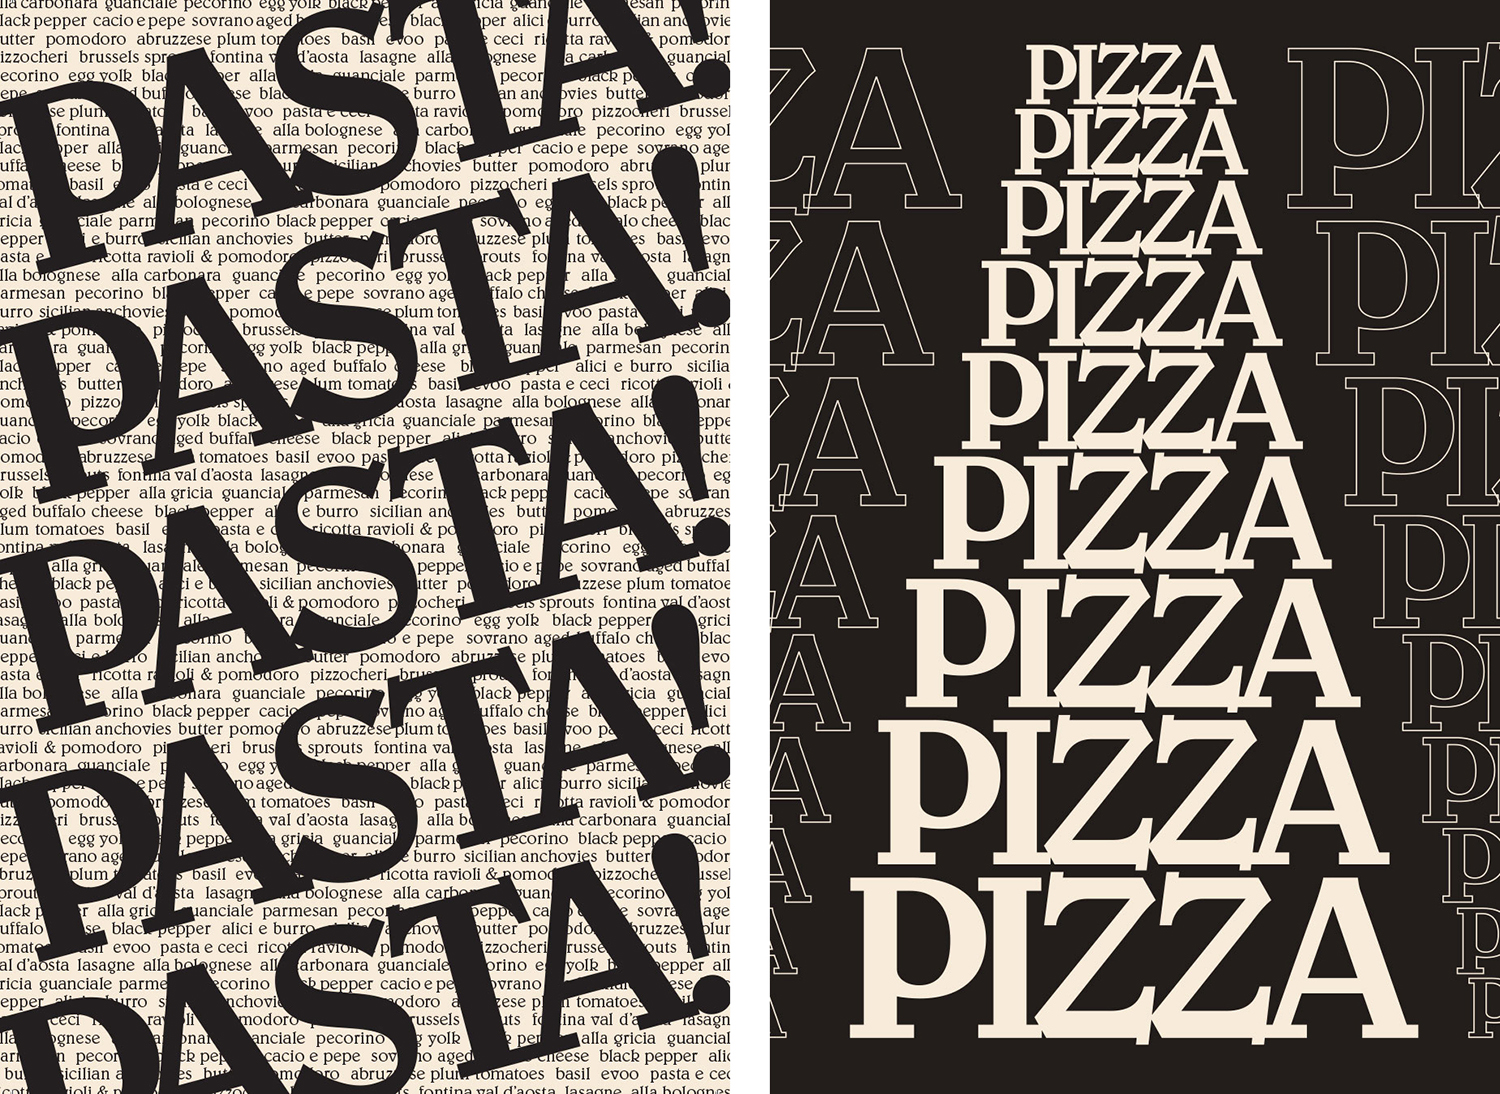 Graphic identity and poster design by Glasfurd & Walker for Italian caffé and ristorante Di Beppe